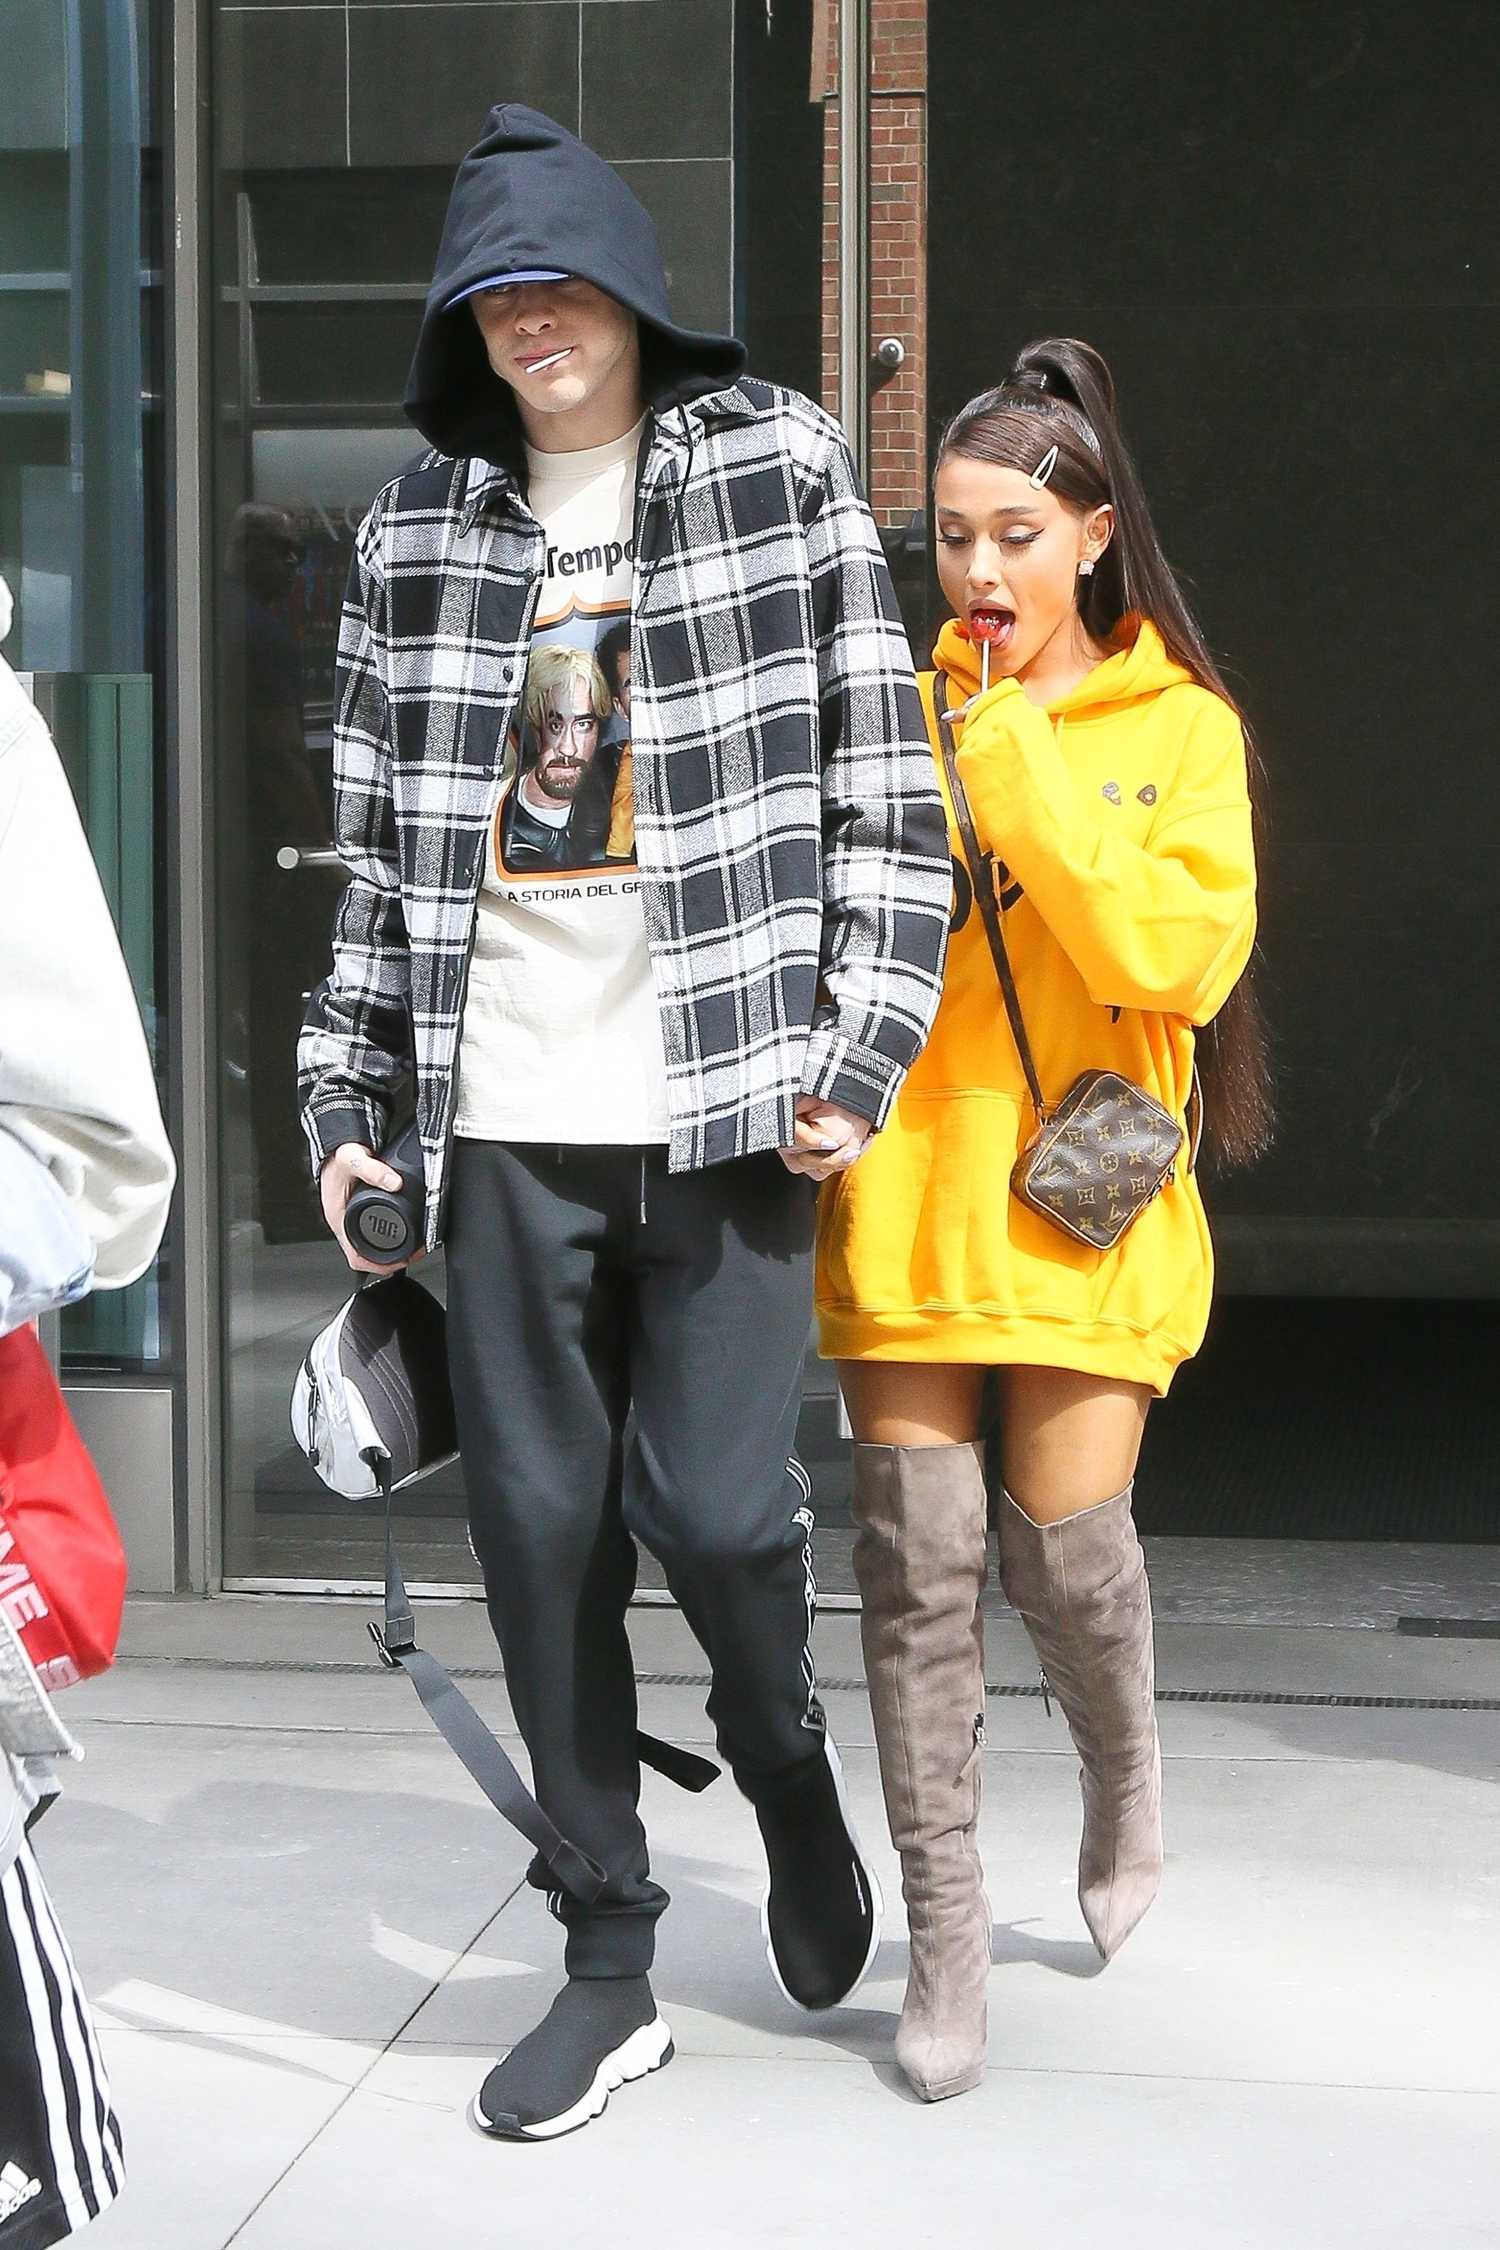 Ariana Grande Wears a Yellow Hoody Out in NYC – Celeb Donut